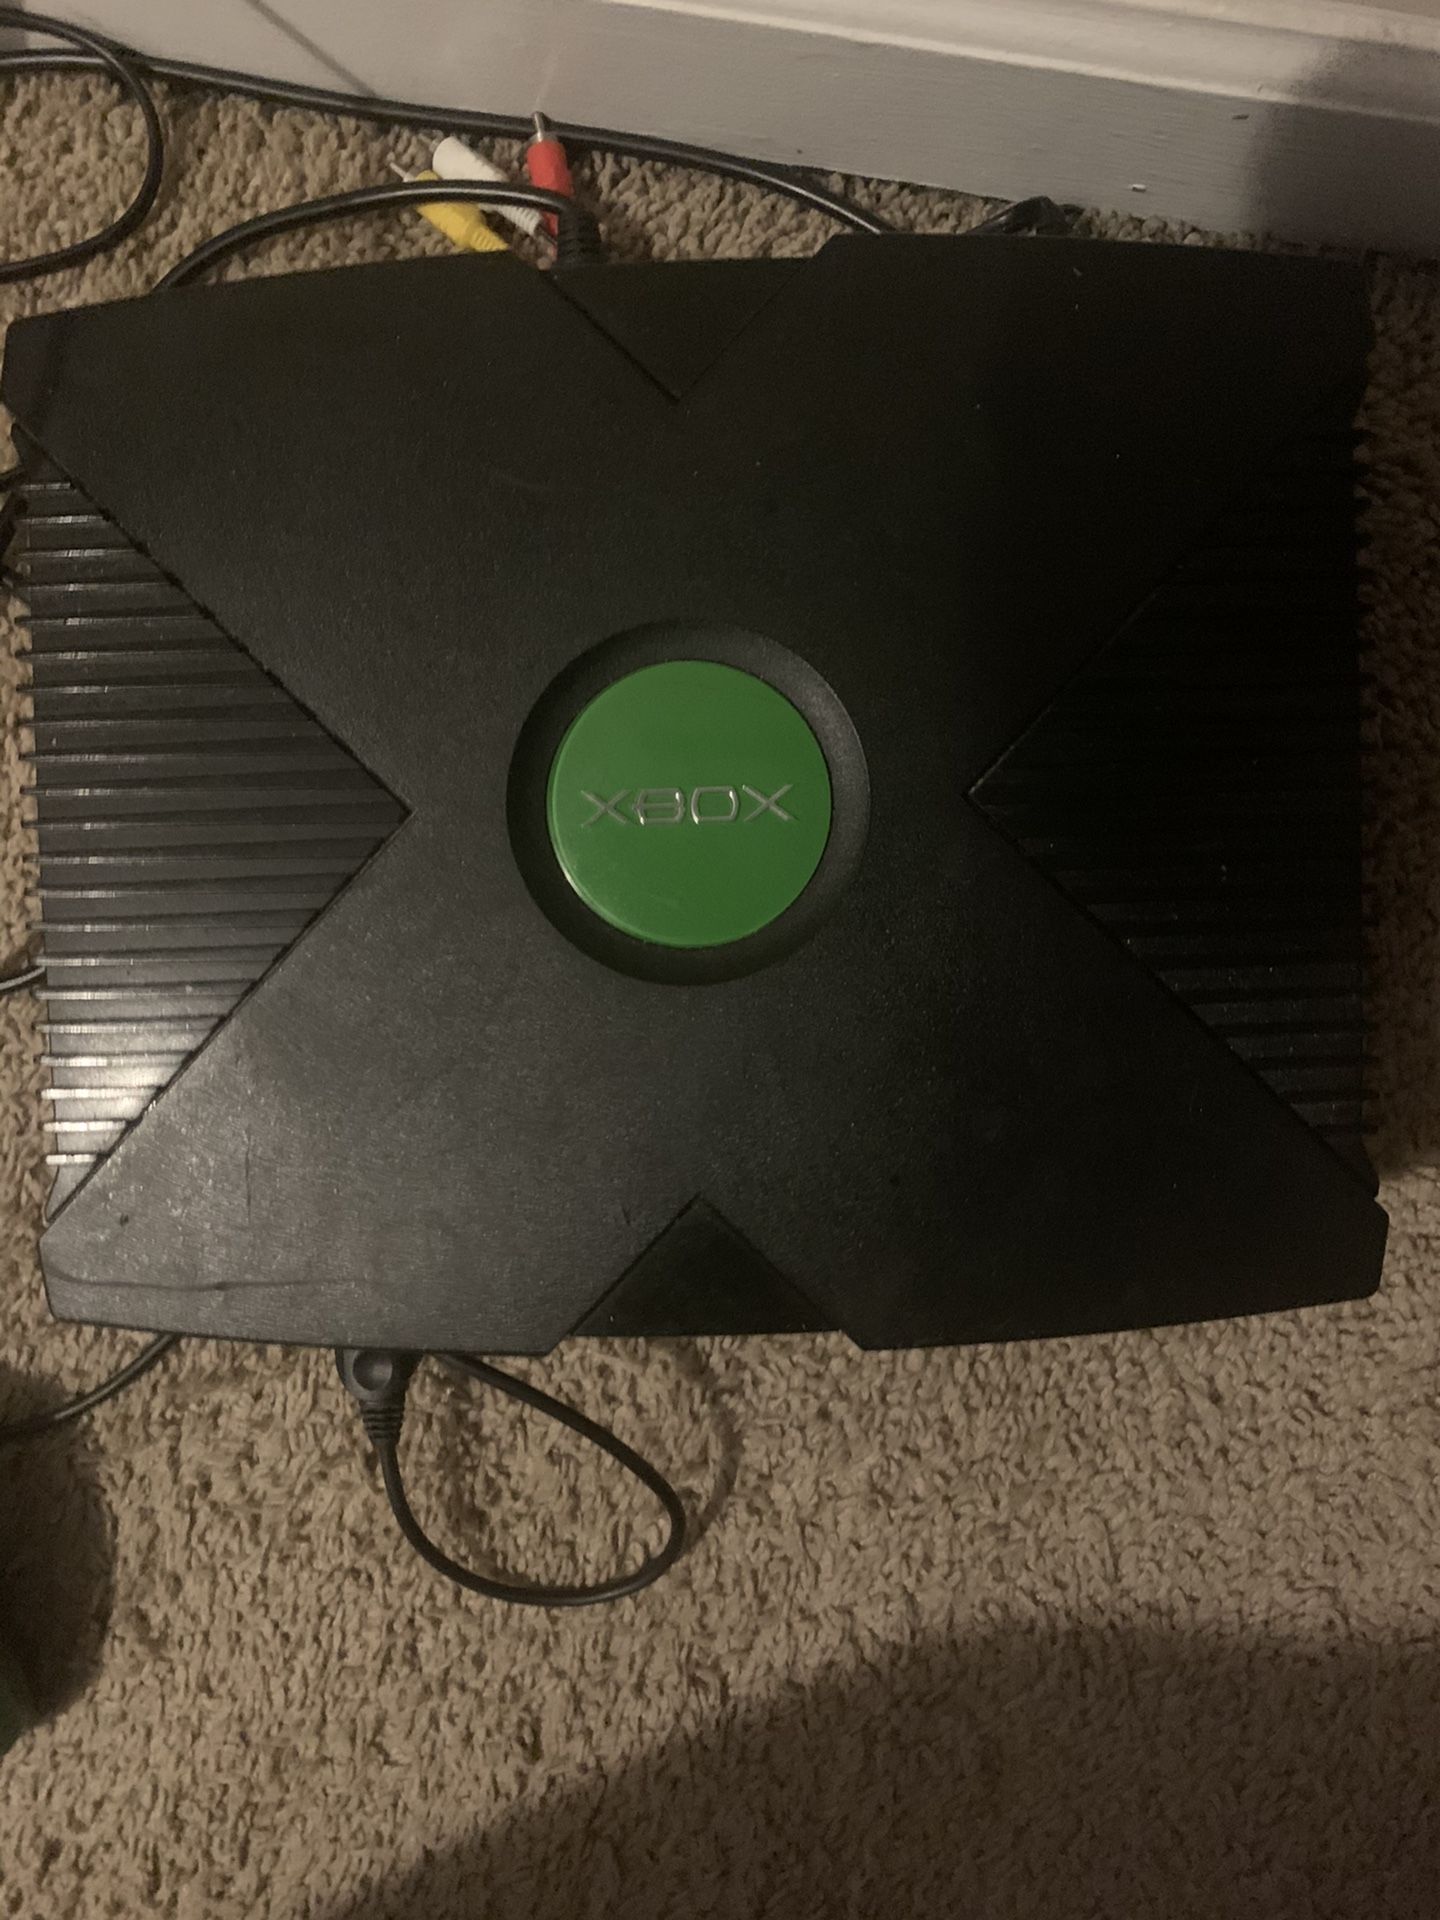 X box 1 (Chipped and Modded) Vintage 